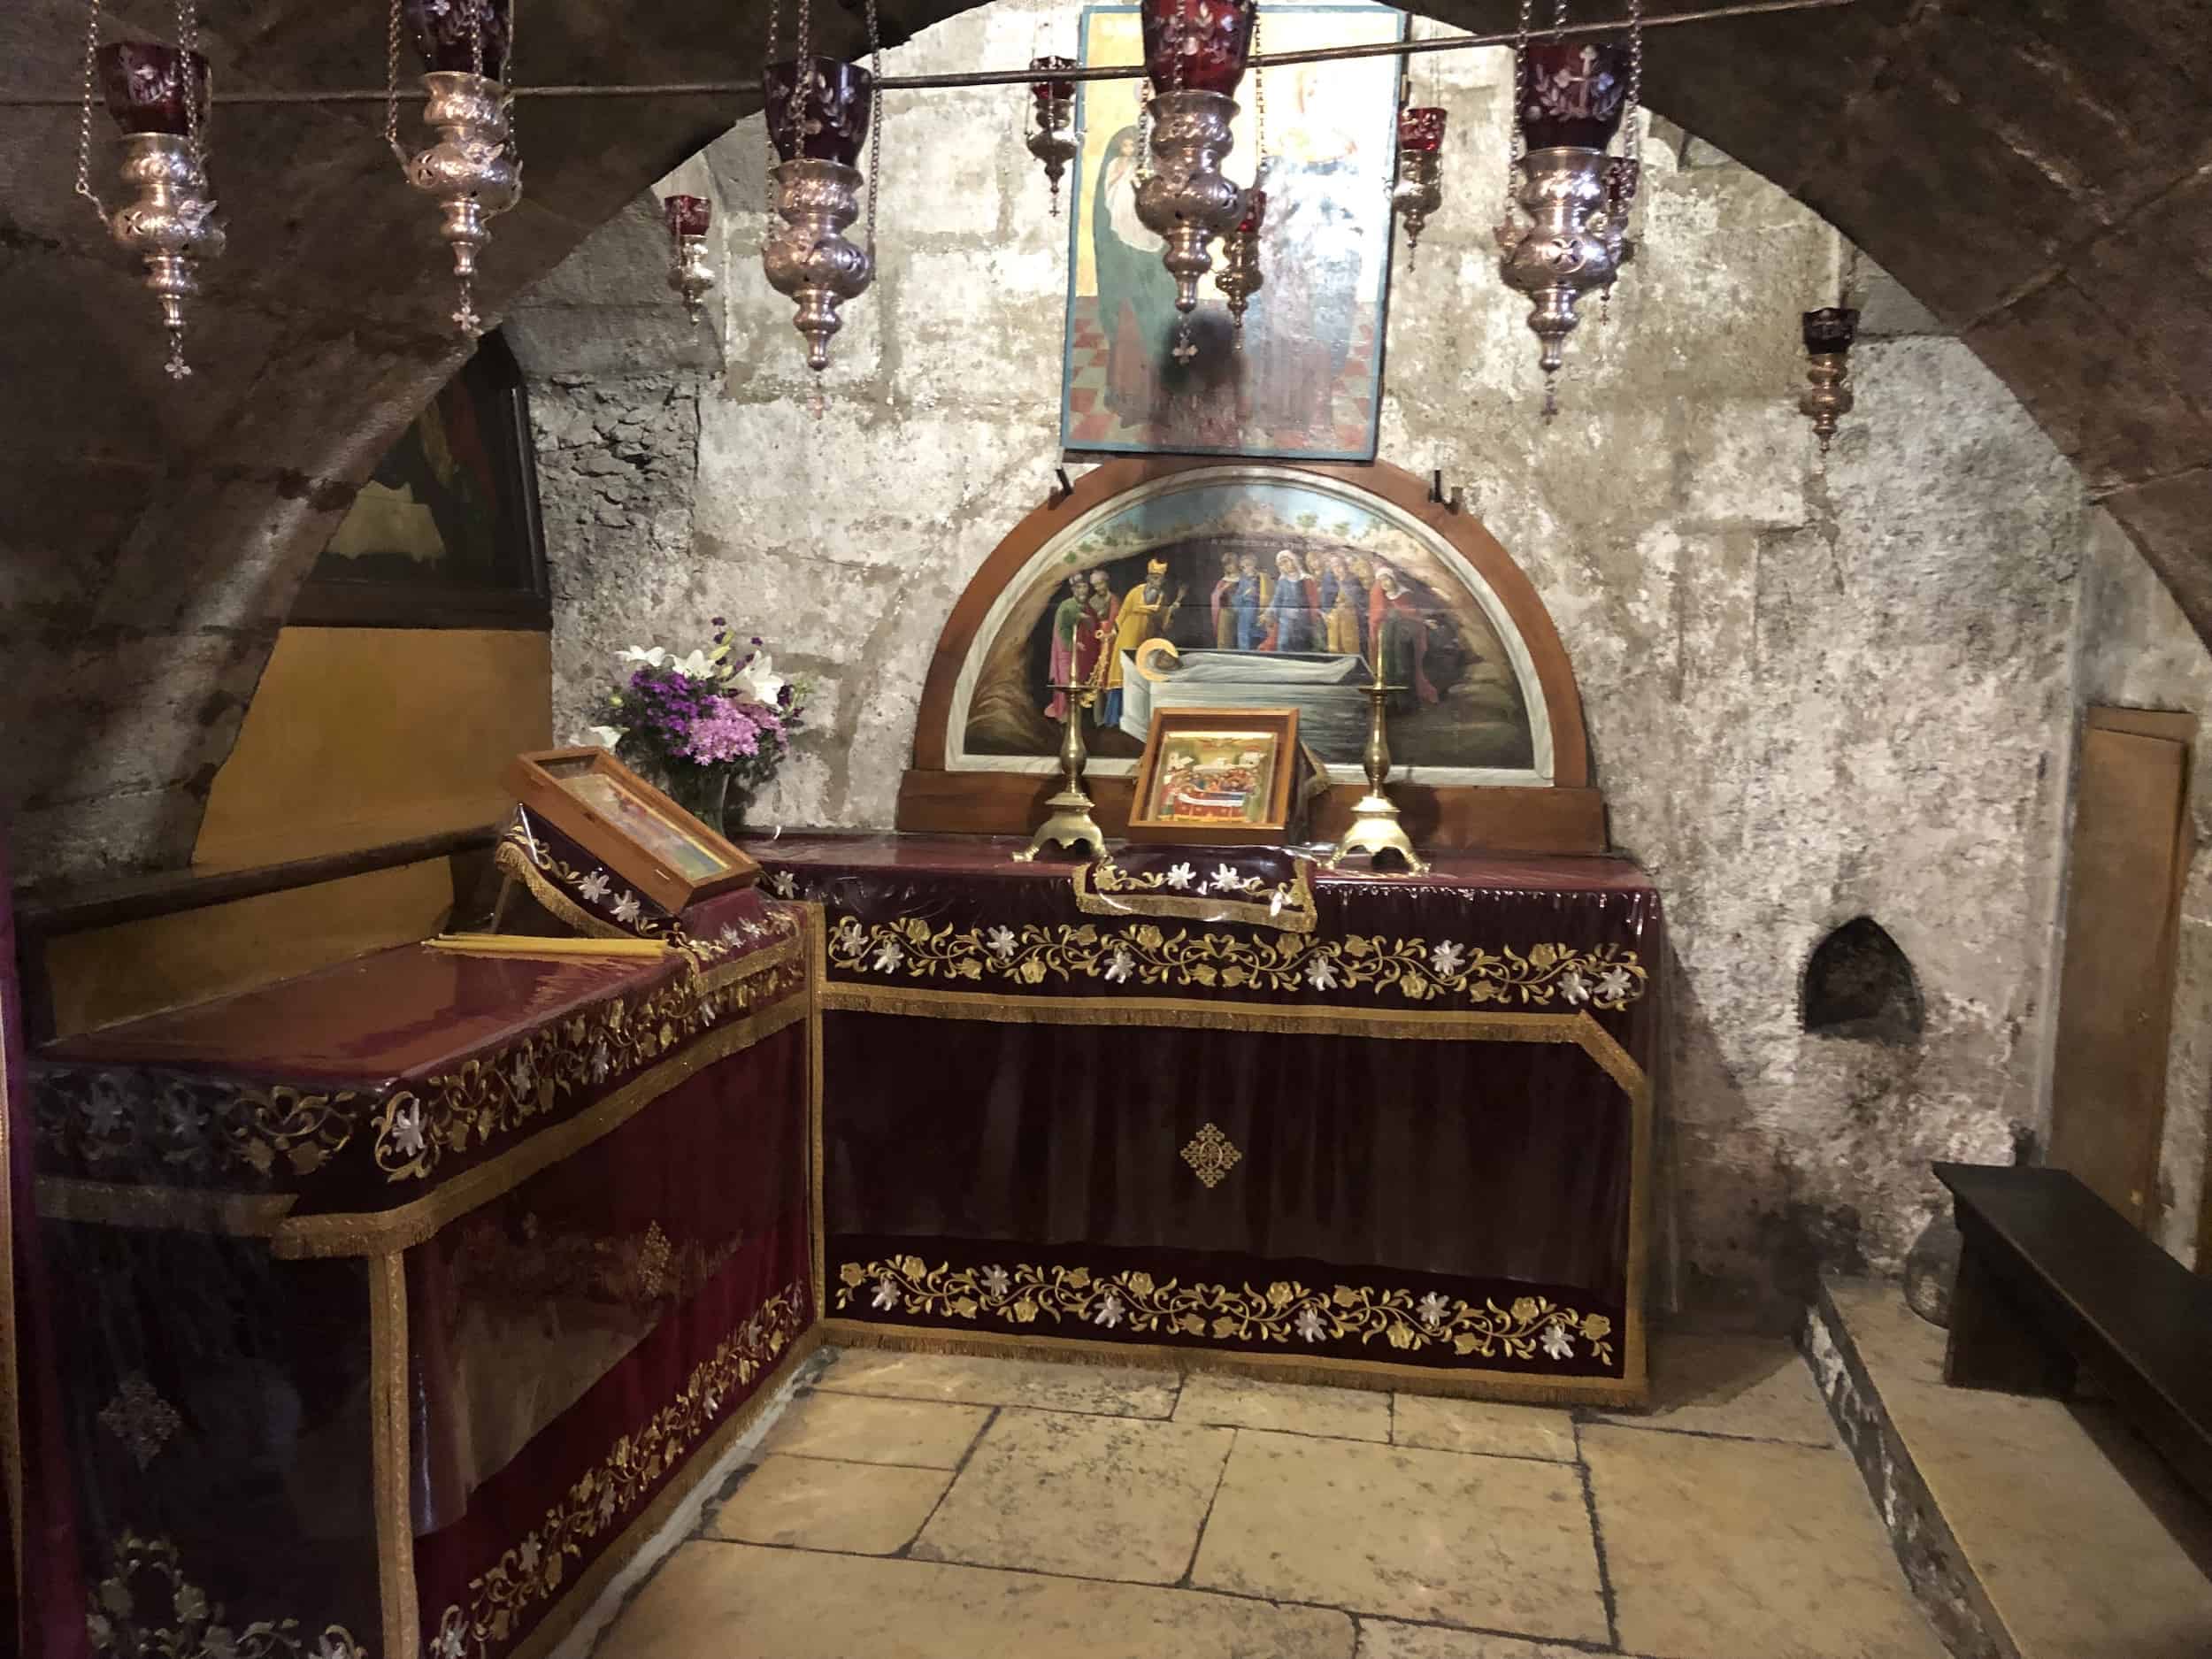 Chapel of Saints Joachim and Anna at the Tomb of the Virgin Mary in Gethsemane, Jerusalem